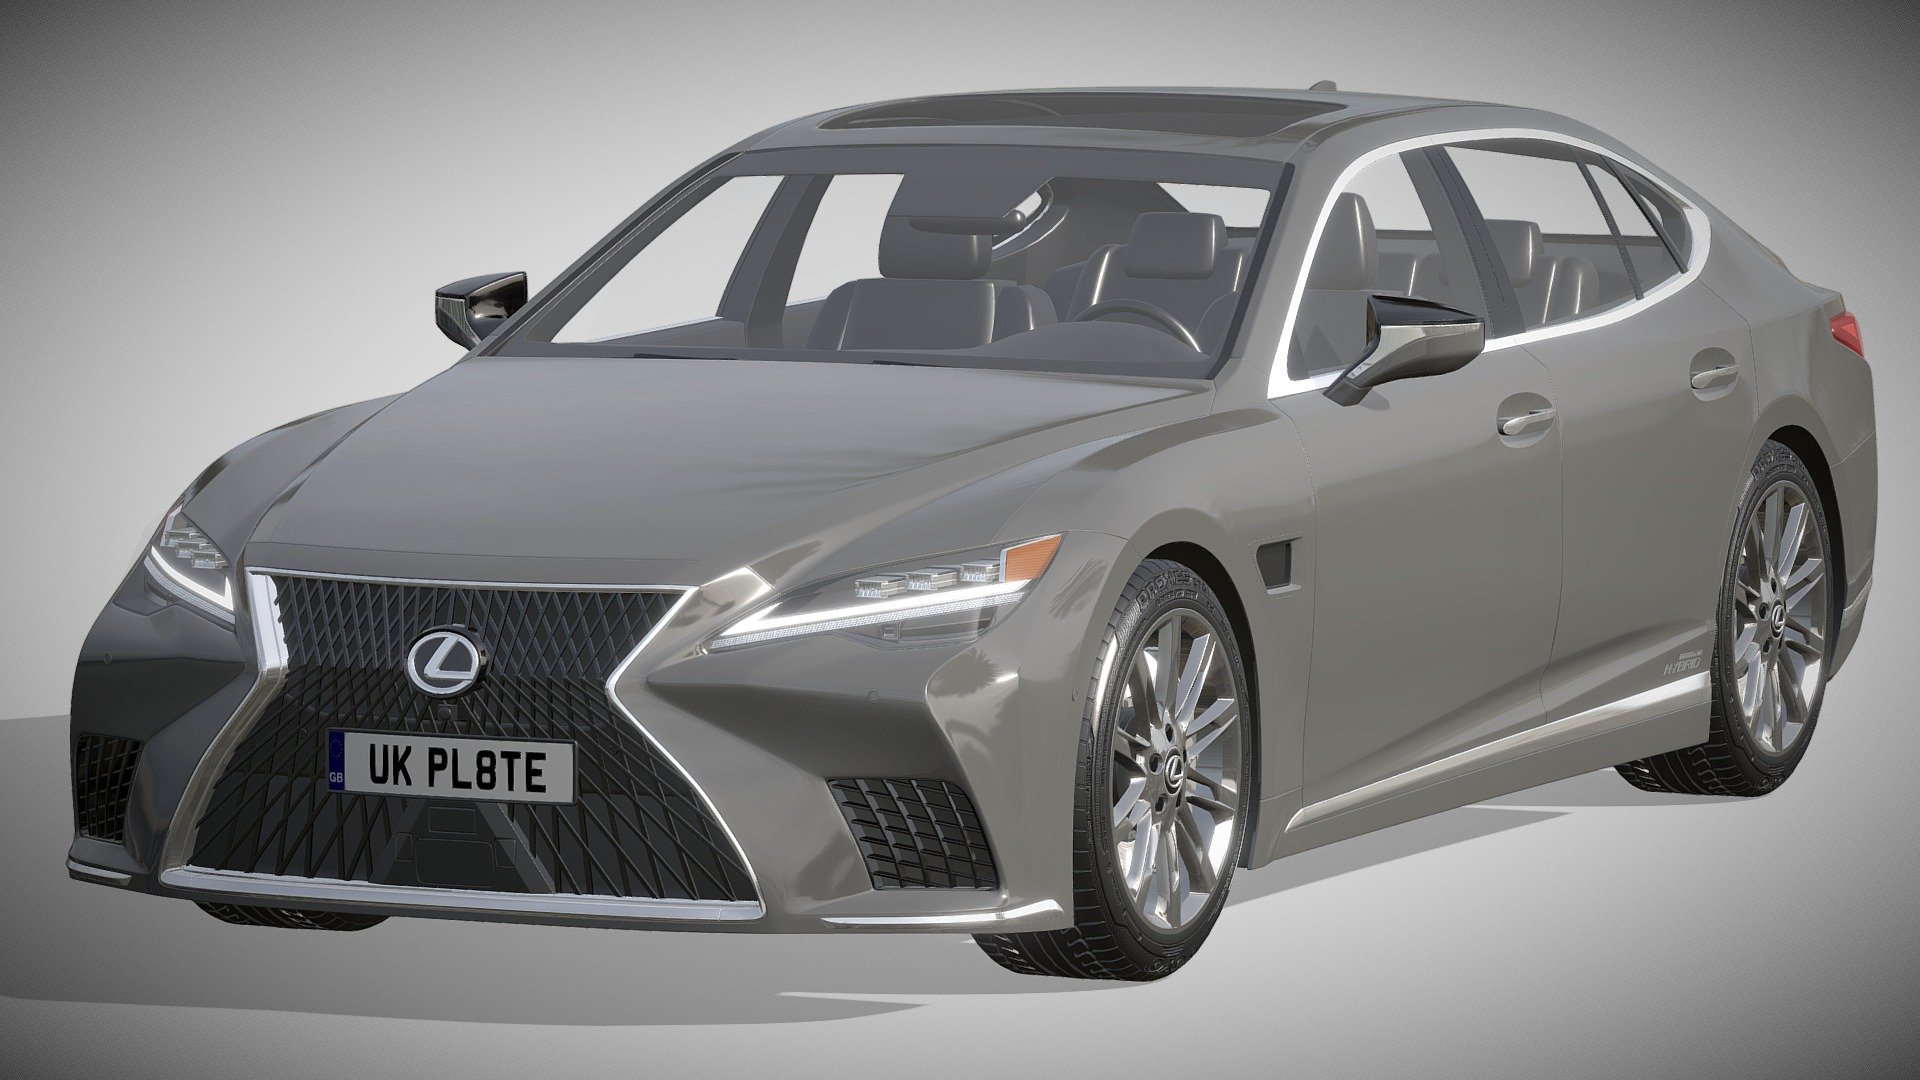 Lexus LS500h Hybrid 2022

https://www.lexus.com/models/LS-hybrid

Clean geometry Light weight model, yet completely detailed for HI-Res renders. Use for movies, Advertisements or games

Corona render and materials

All textures include in *.rar files

Lighting setup is not included in the file! - Lexus LS500h Hybrid 2022 - Buy Royalty Free 3D model by zifir3d 3d model